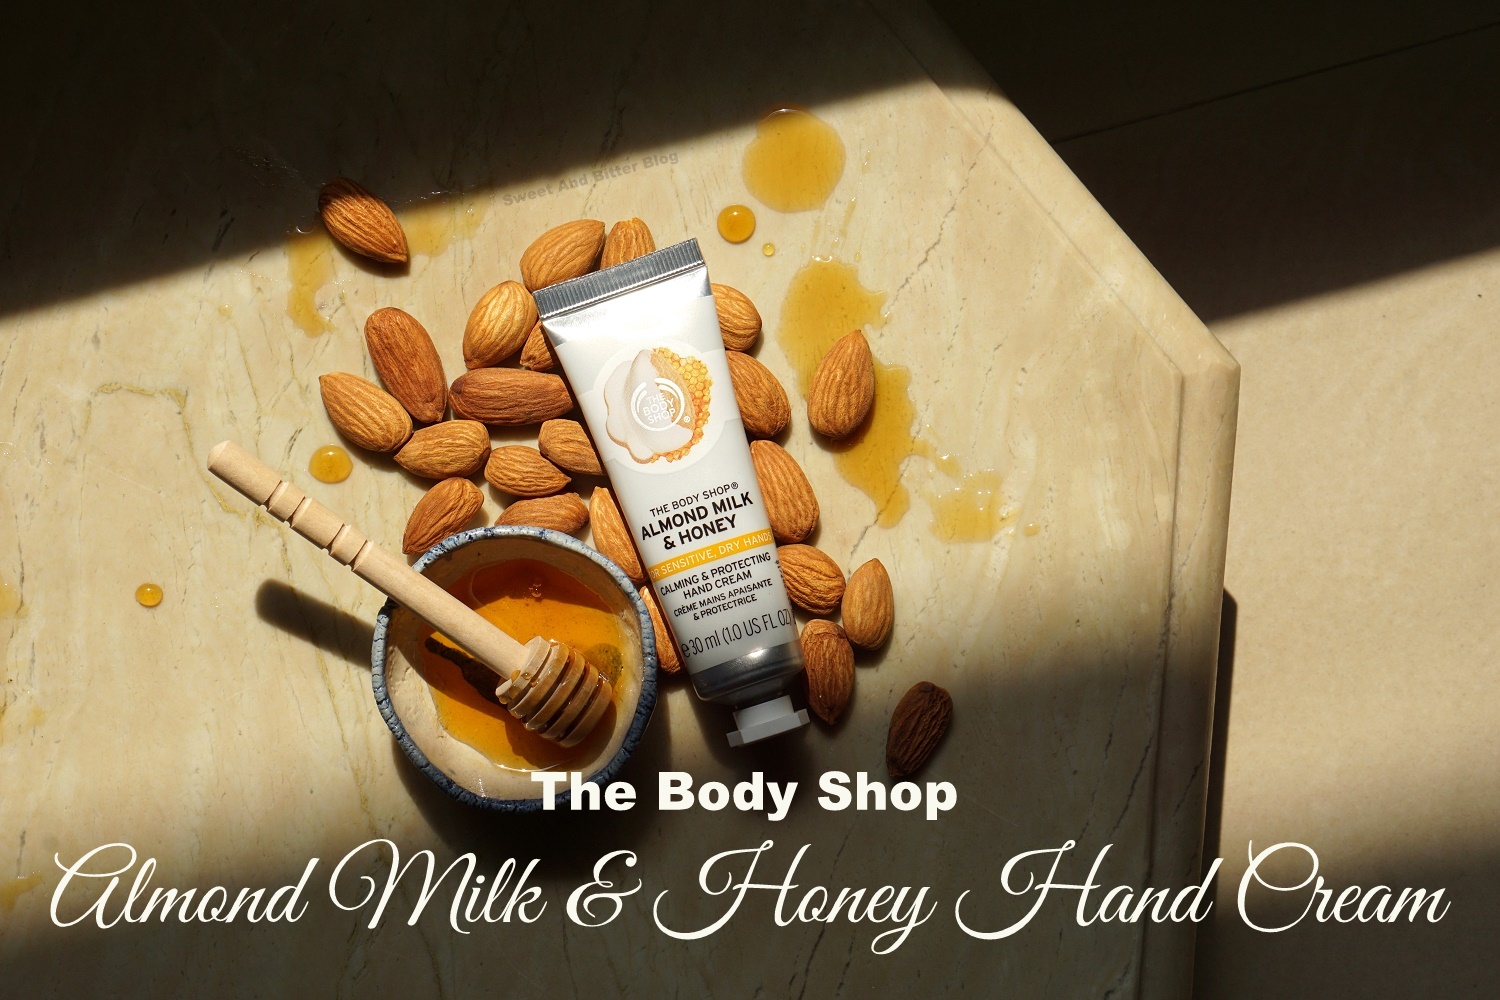 The Body Shop Almond Milk and Honey Calming & Protecting Hand Cream